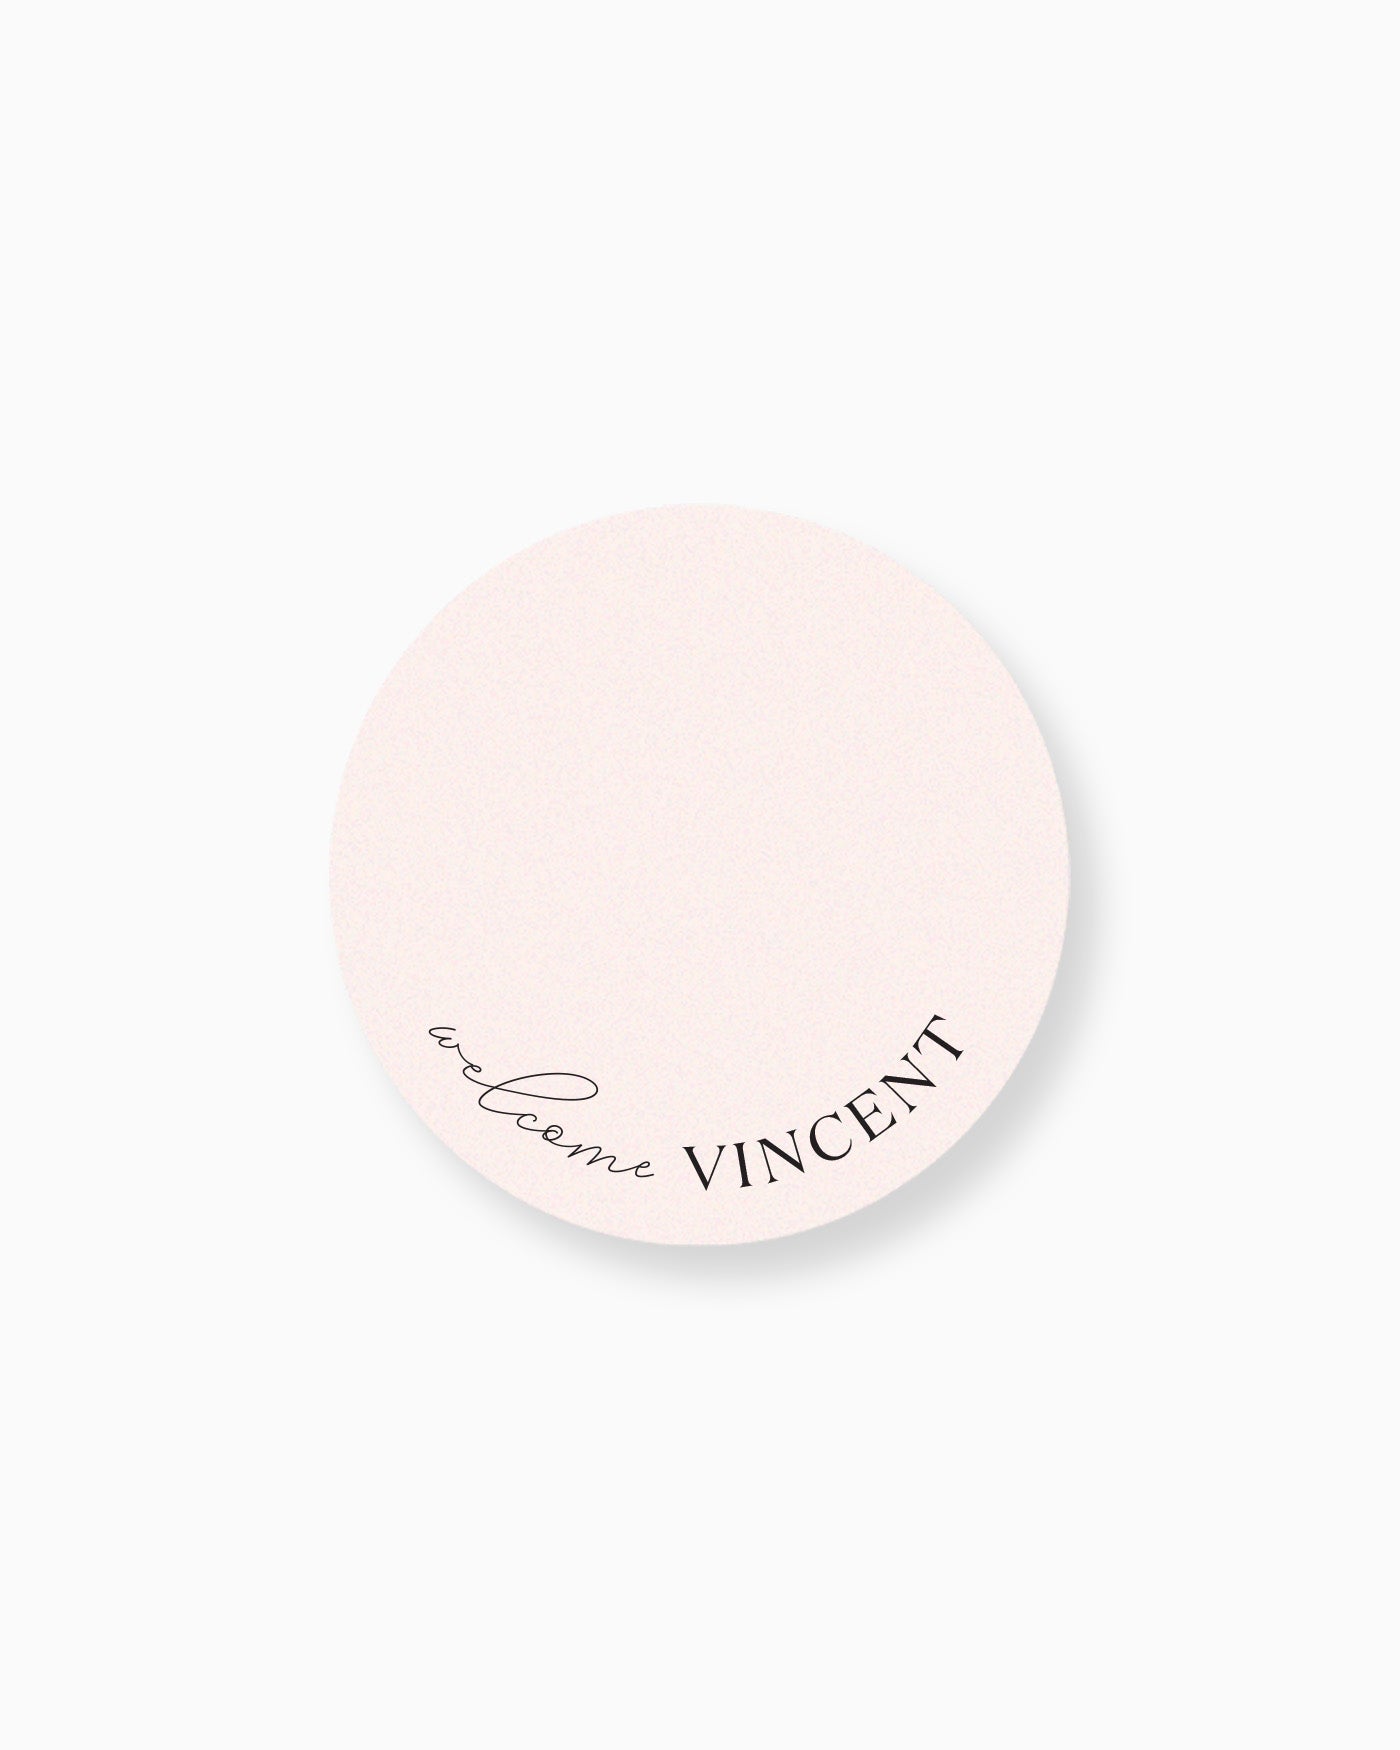 Peppermint Press On the Day Palms Place Card Coaster